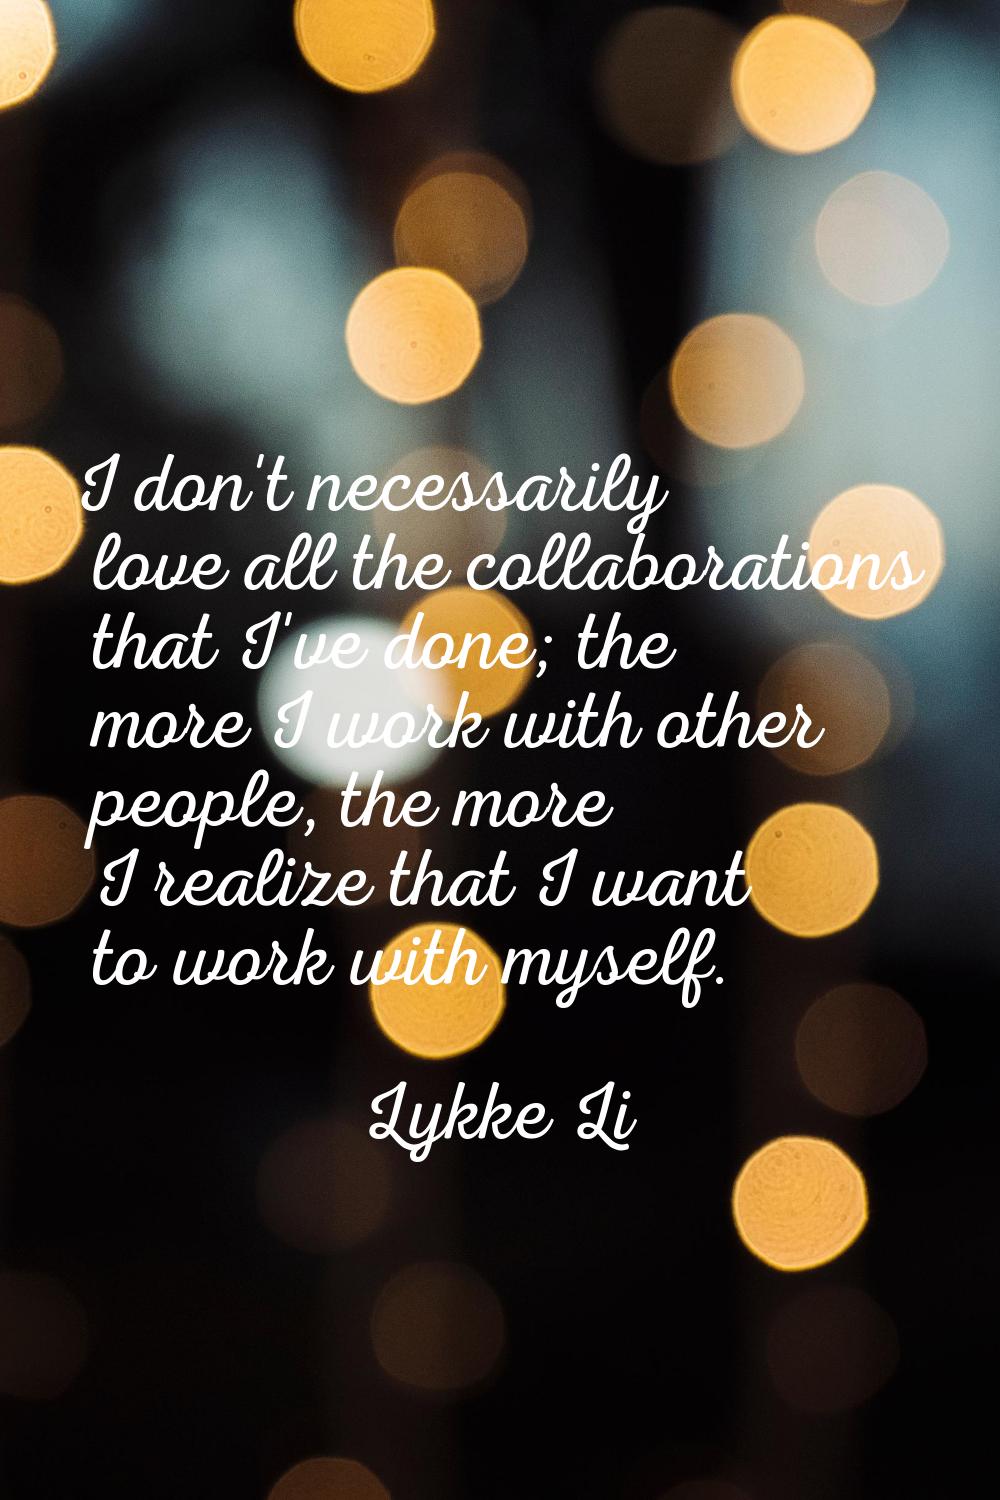 I don't necessarily love all the collaborations that I've done; the more I work with other people, 